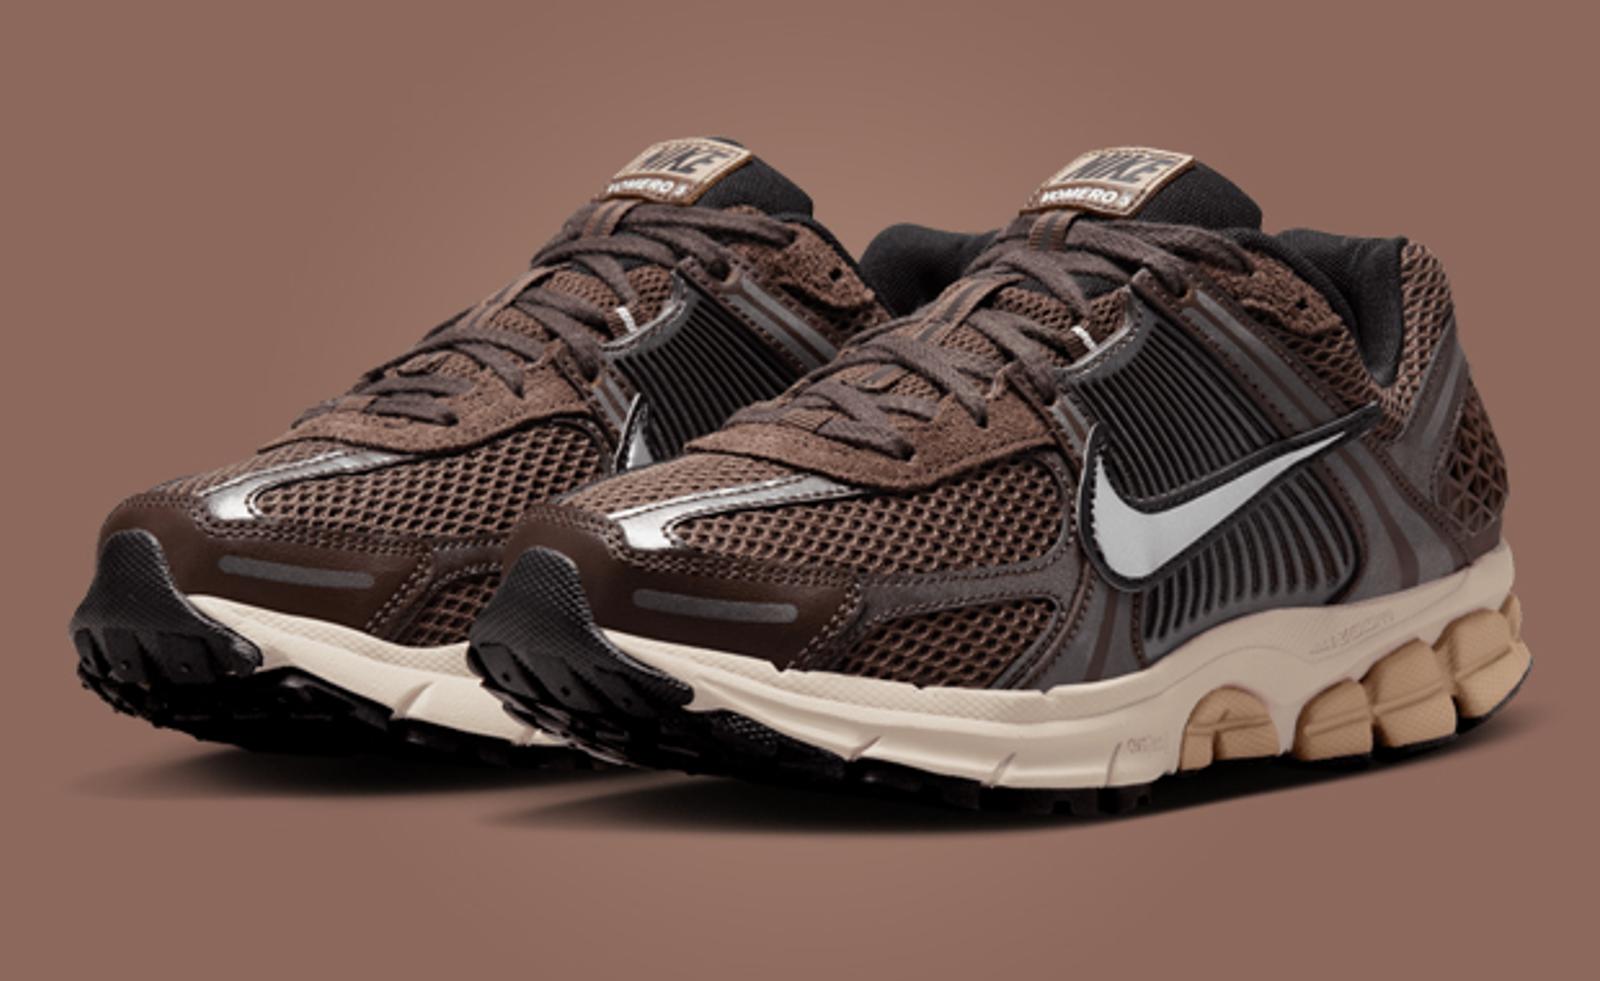 Baroque Brown Covers This Women's Nike Zoom Vomero 5